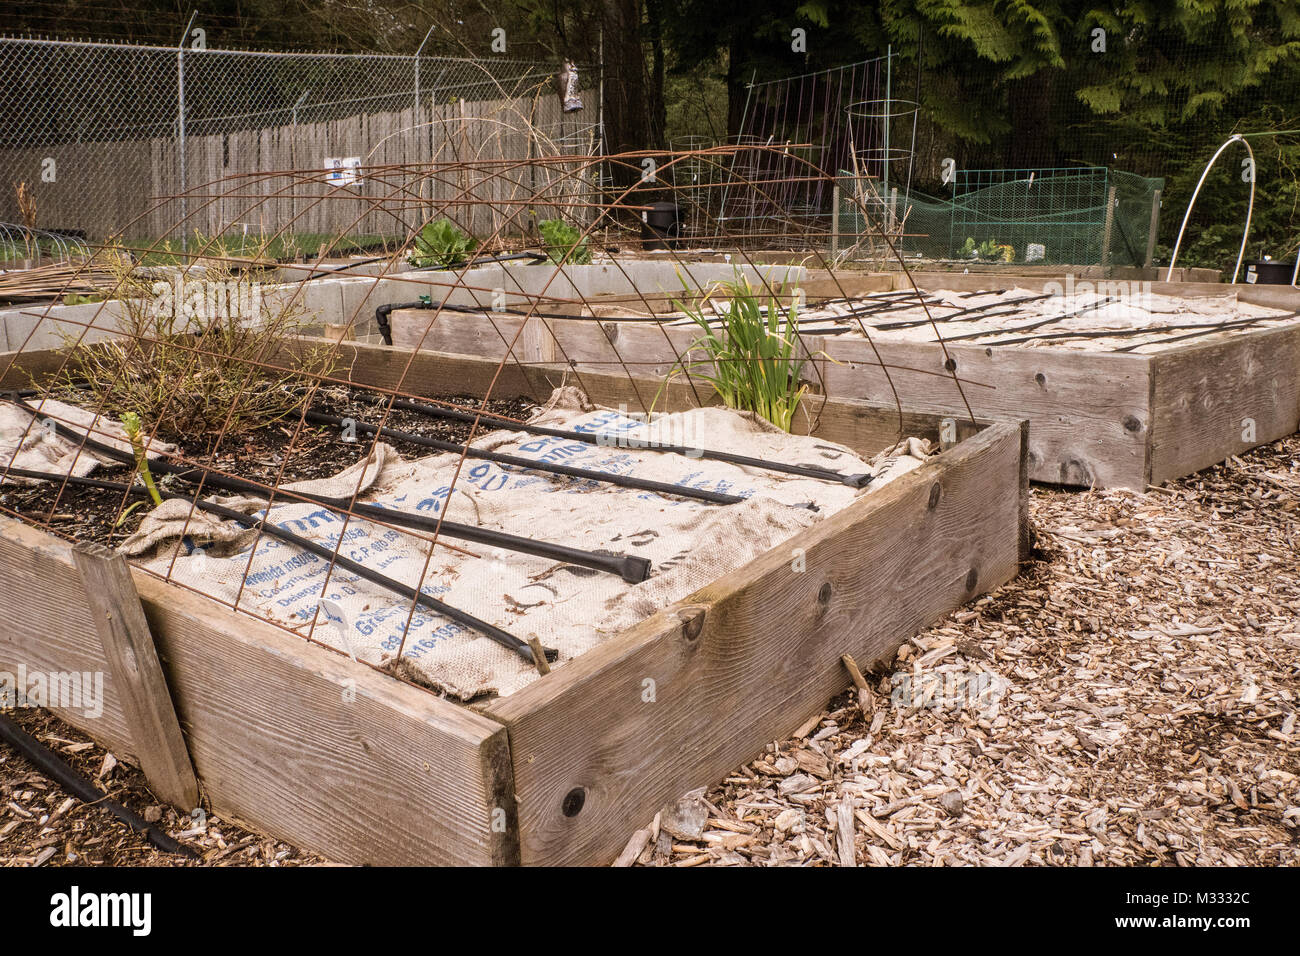 Raised bed vegetable gardens covered by burlap to prevent the rain from washing away the nutrients in the soil over the winter, in a community garden  Stock Photo